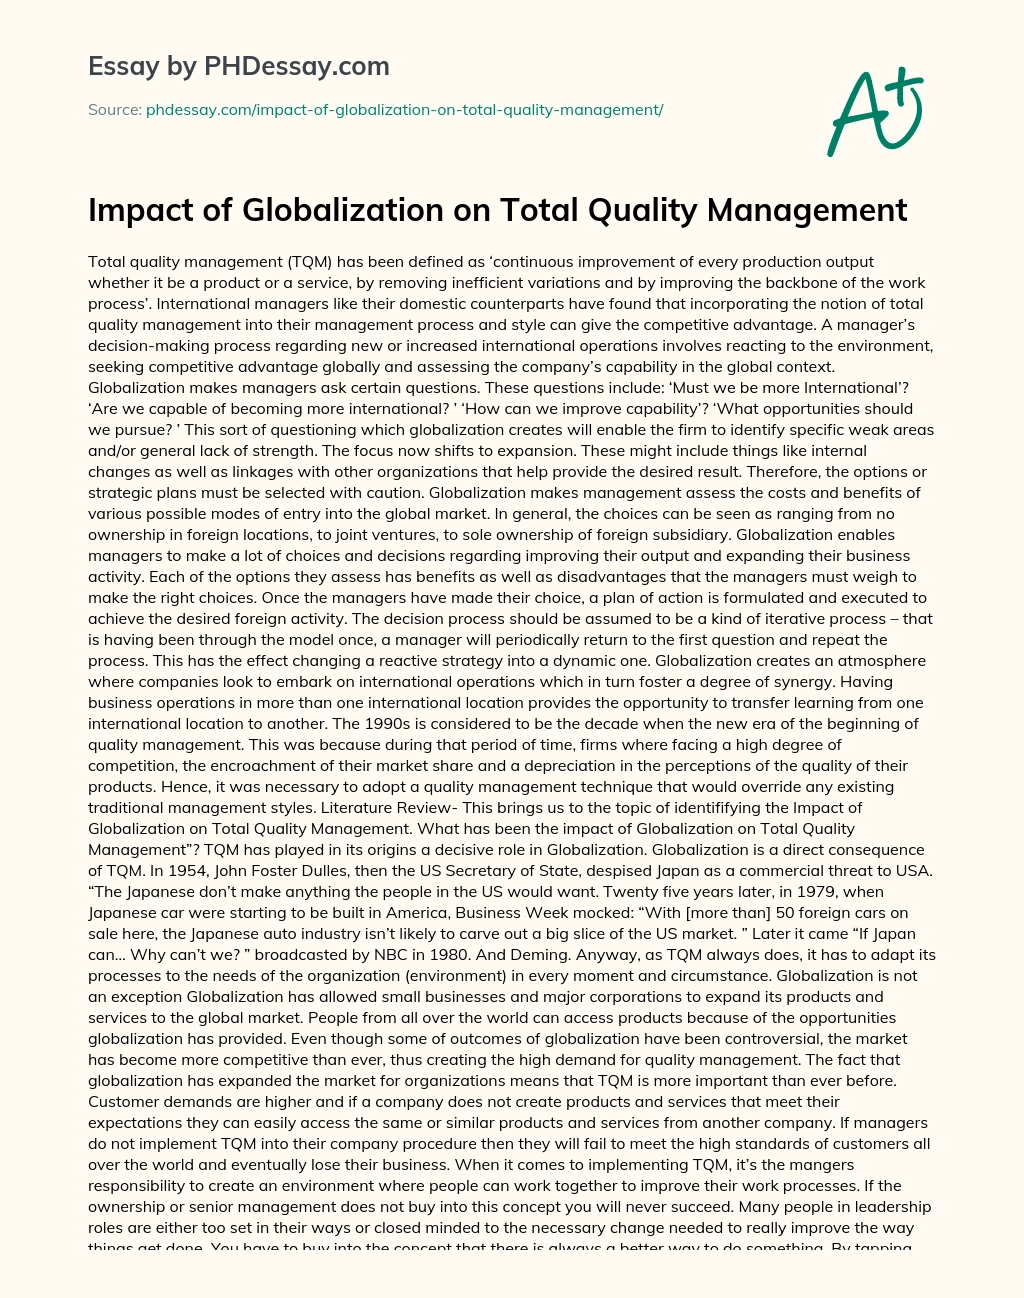 Impact of Globalization on Total Quality Management essay